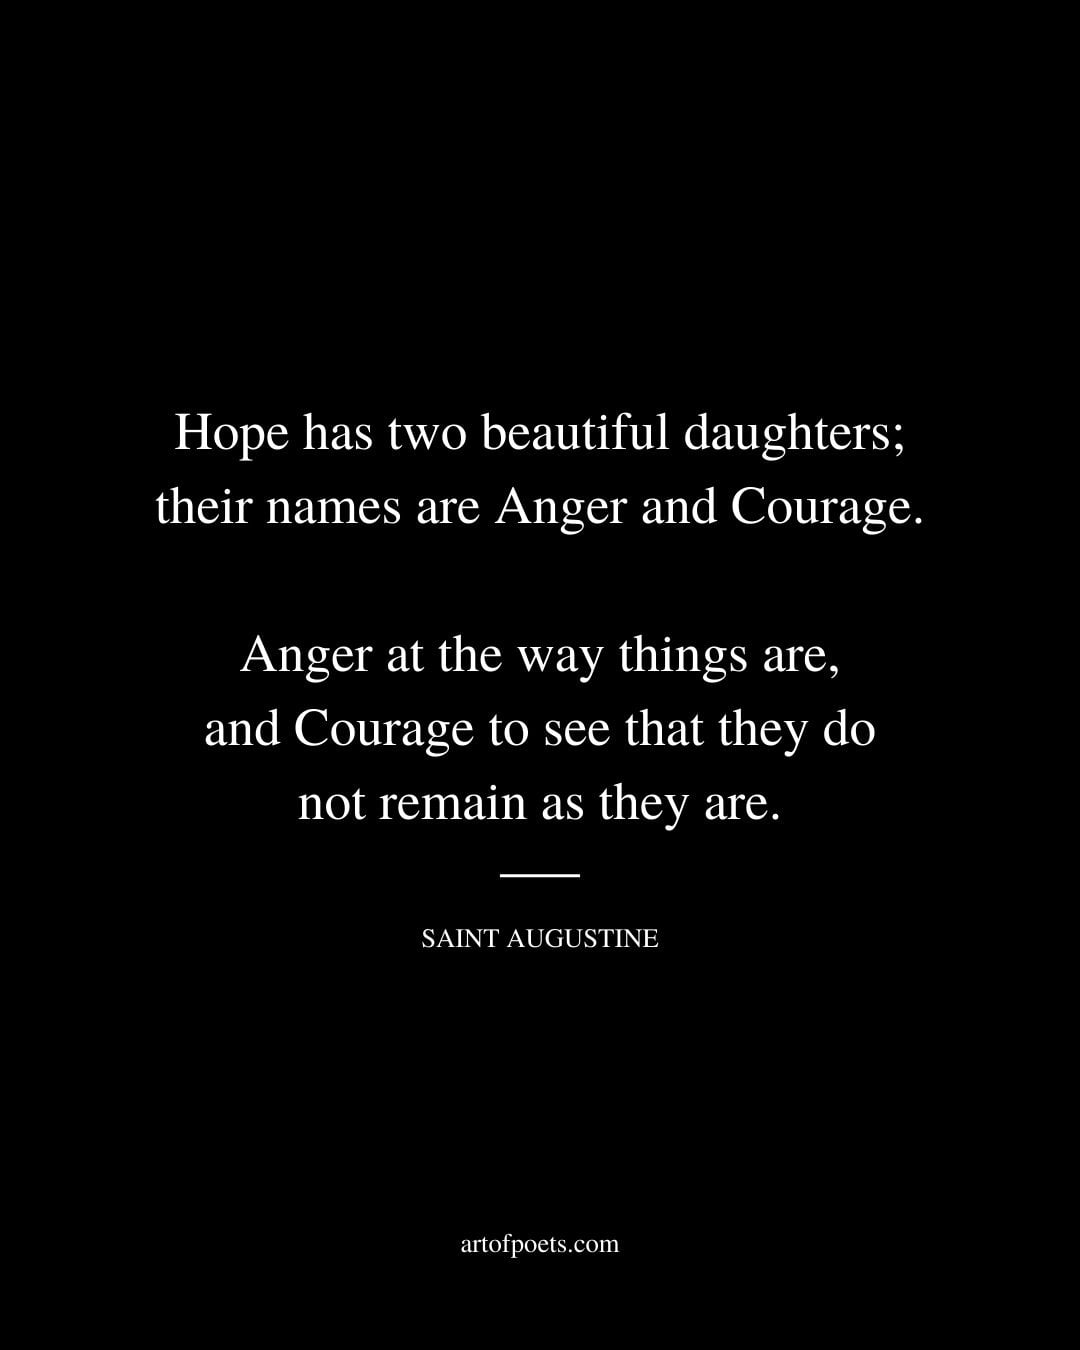 Hope has two beautiful daughters their names are Anger and Courage